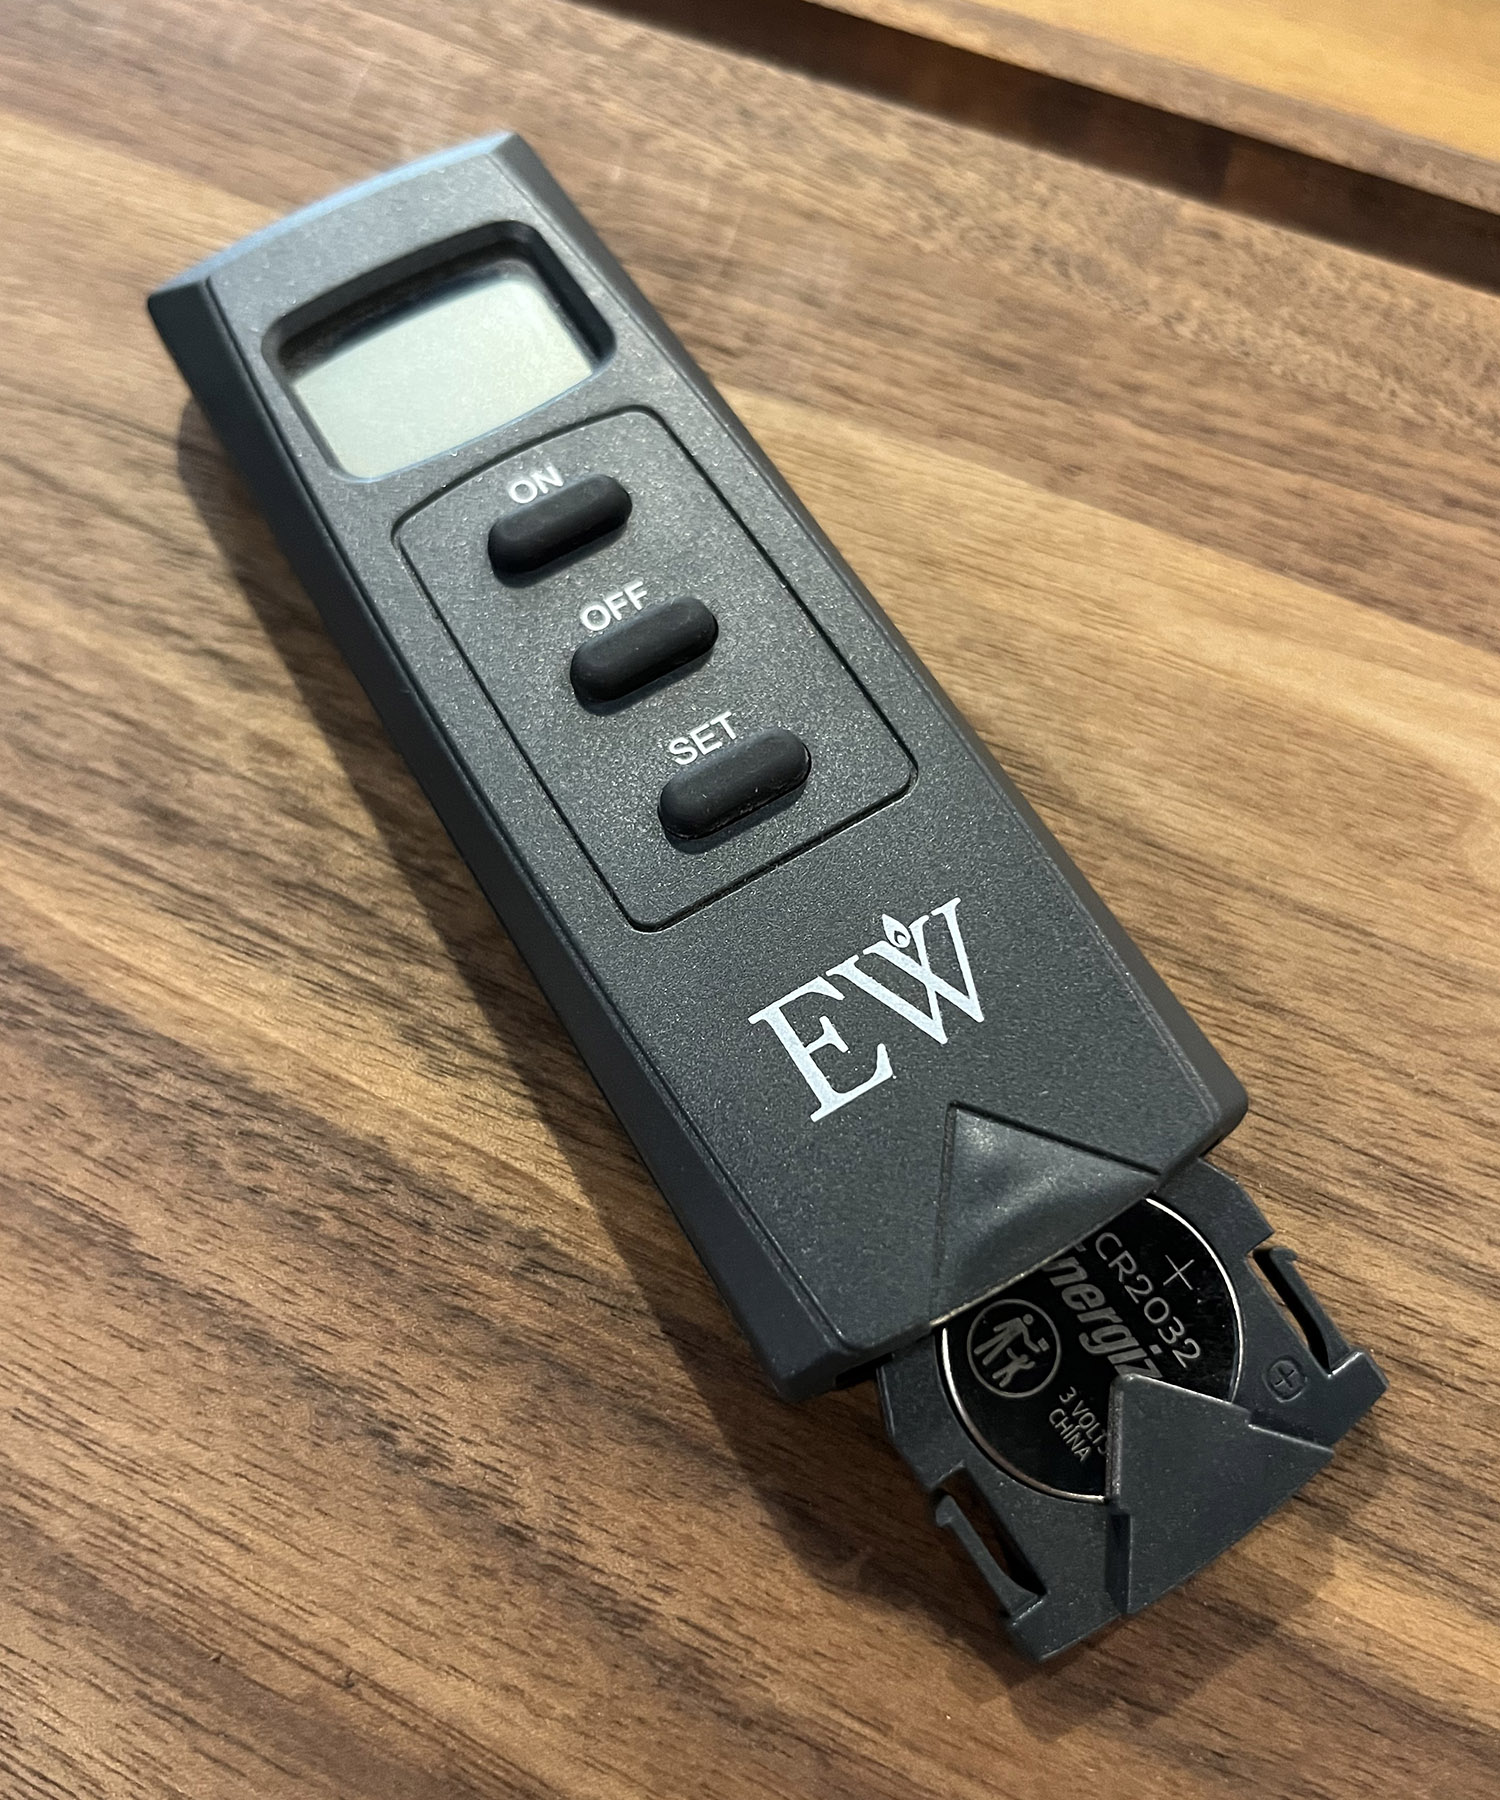 model ew4001th-a battery compartment on fireplace remote